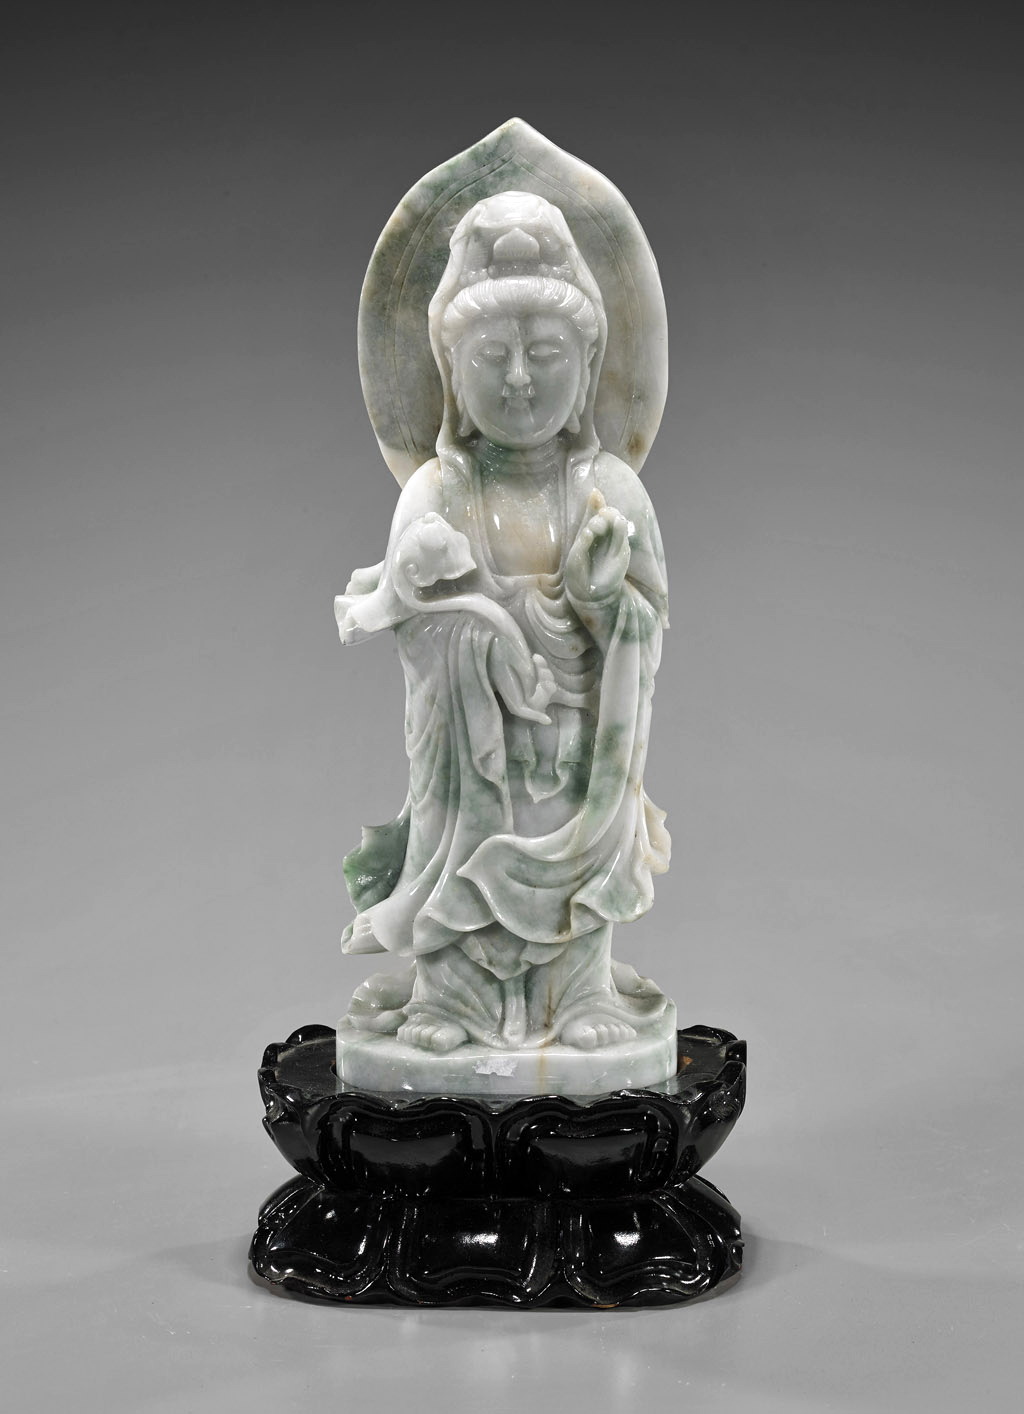 Chinese carved jade Guanyin of celadon color with hints of spinach green and russet suffusions, 12in, with double lotus wood stand. Estimate $1,000-$1,500. I.M. Chait image